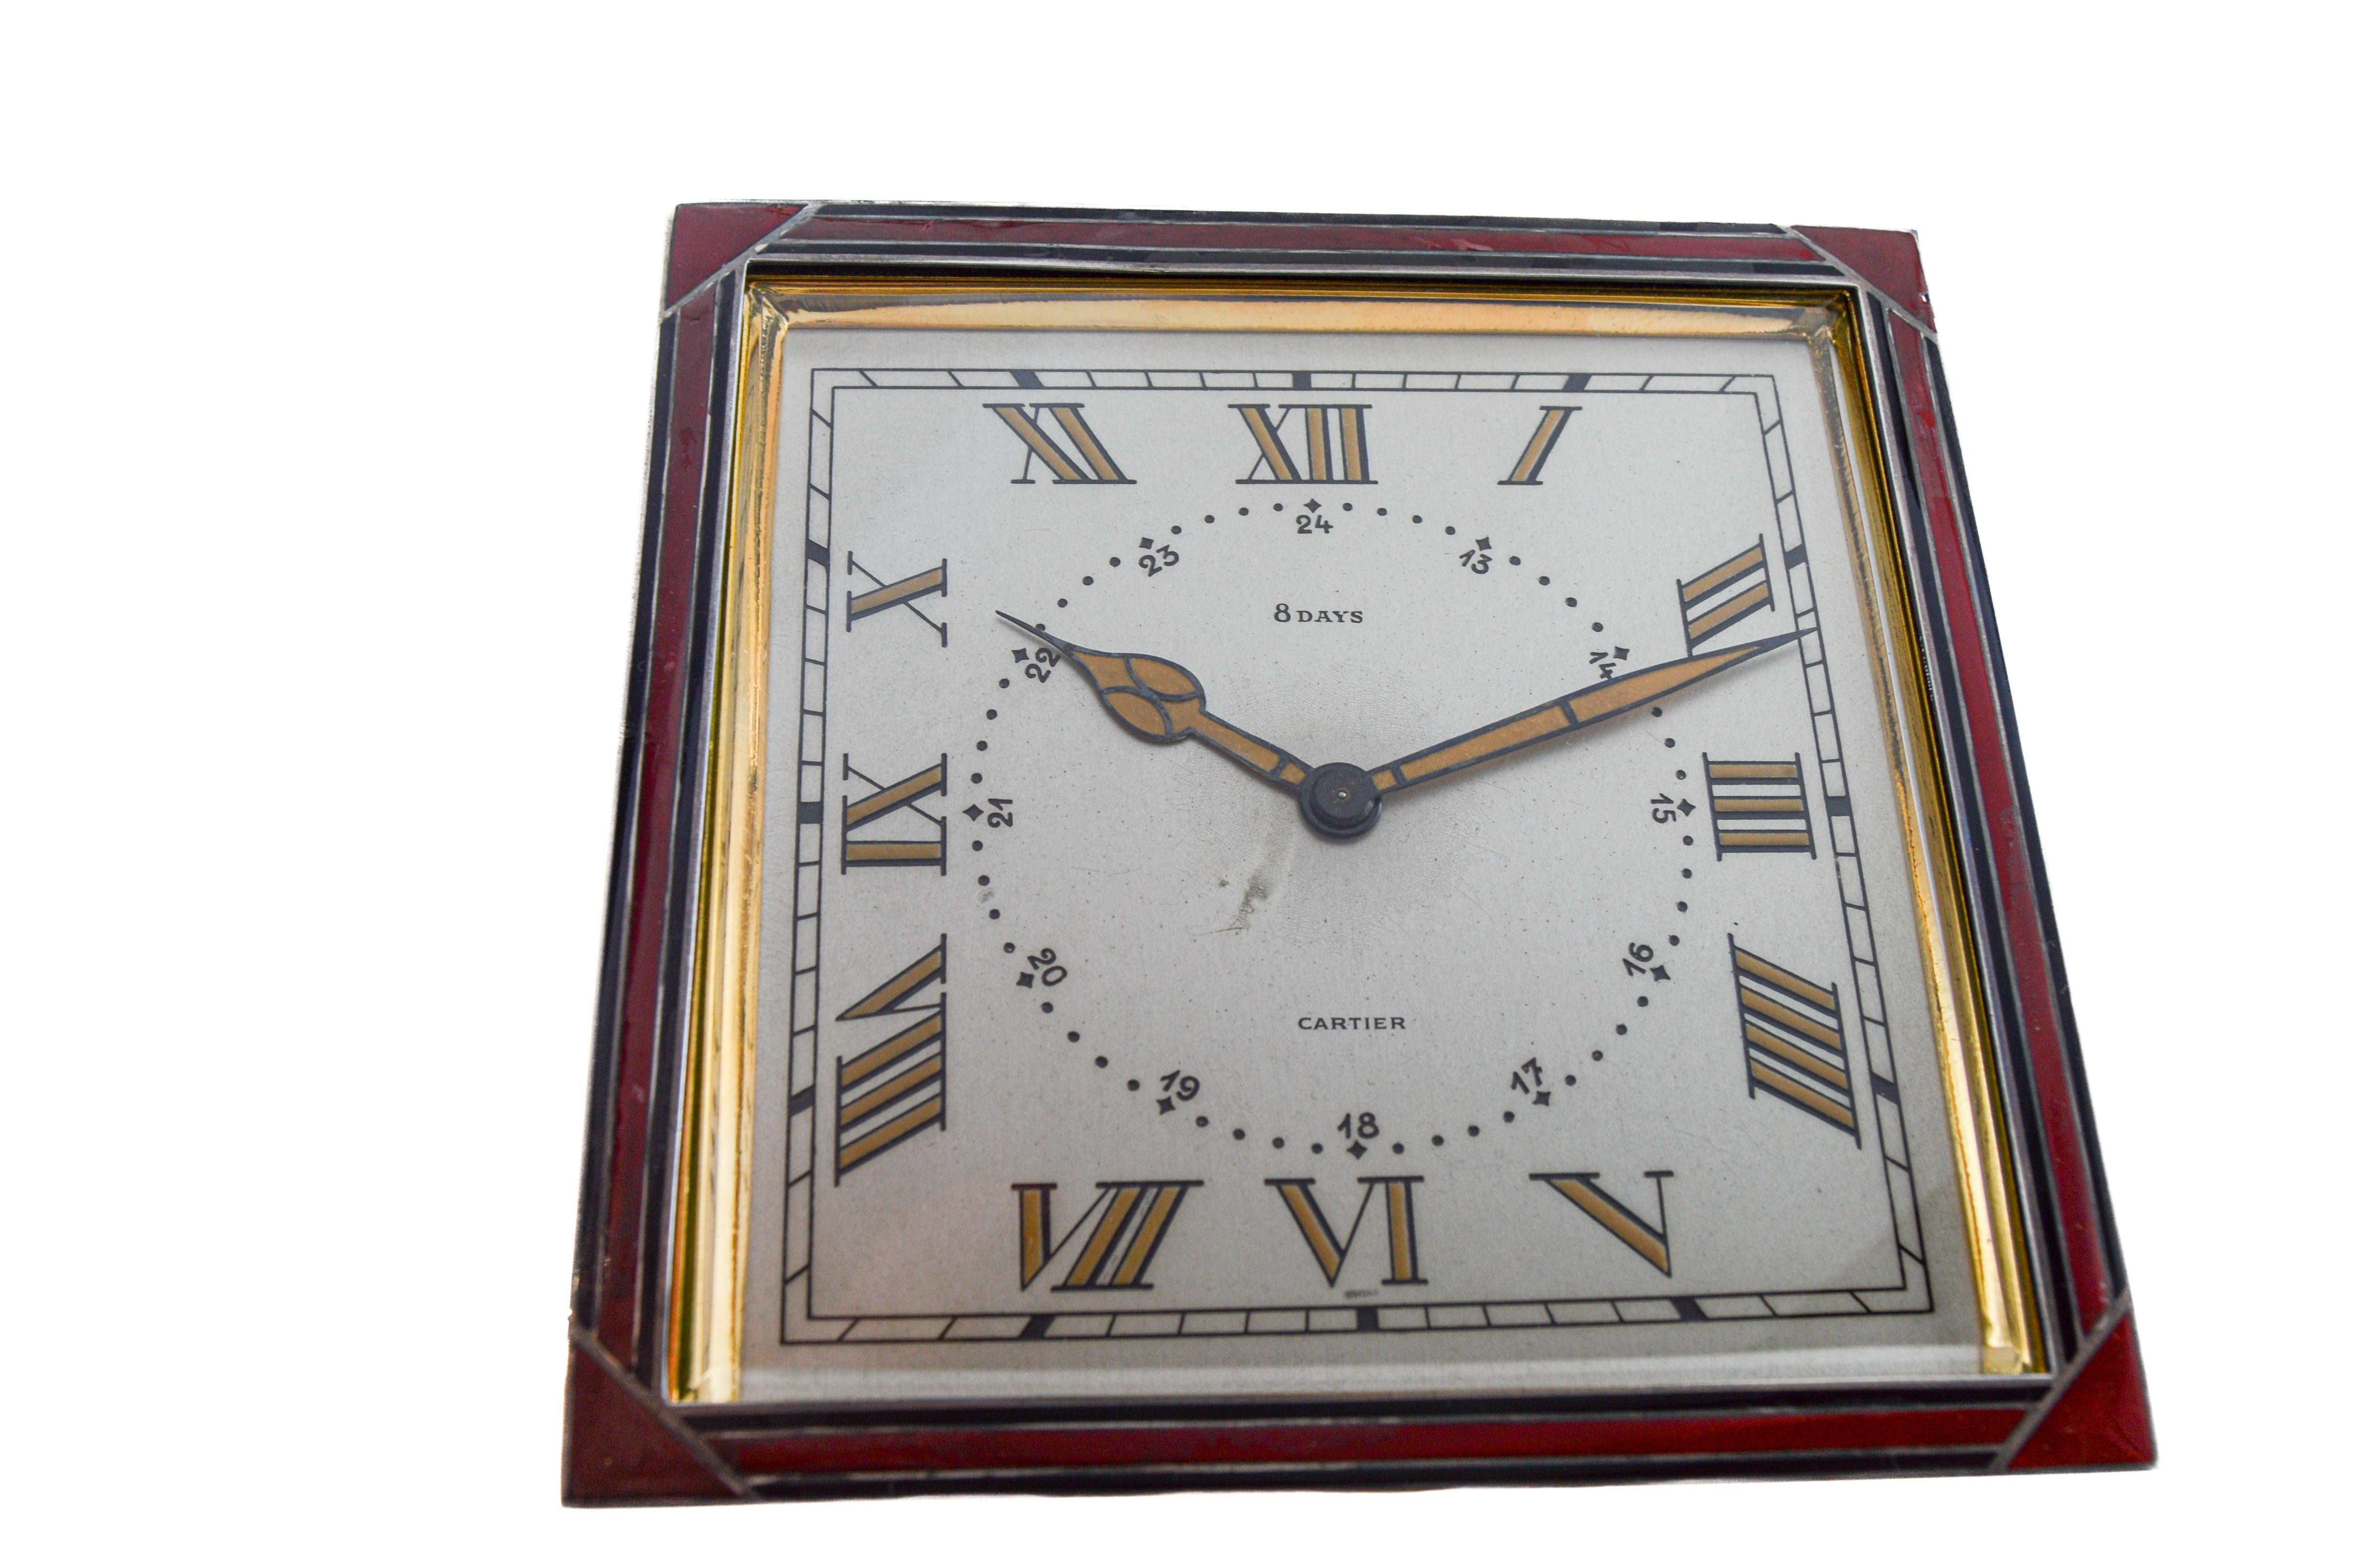 Cartier Sterling and Enamel Art Deco Desk Clock with Breguet Engine Turned Dial For Sale 5